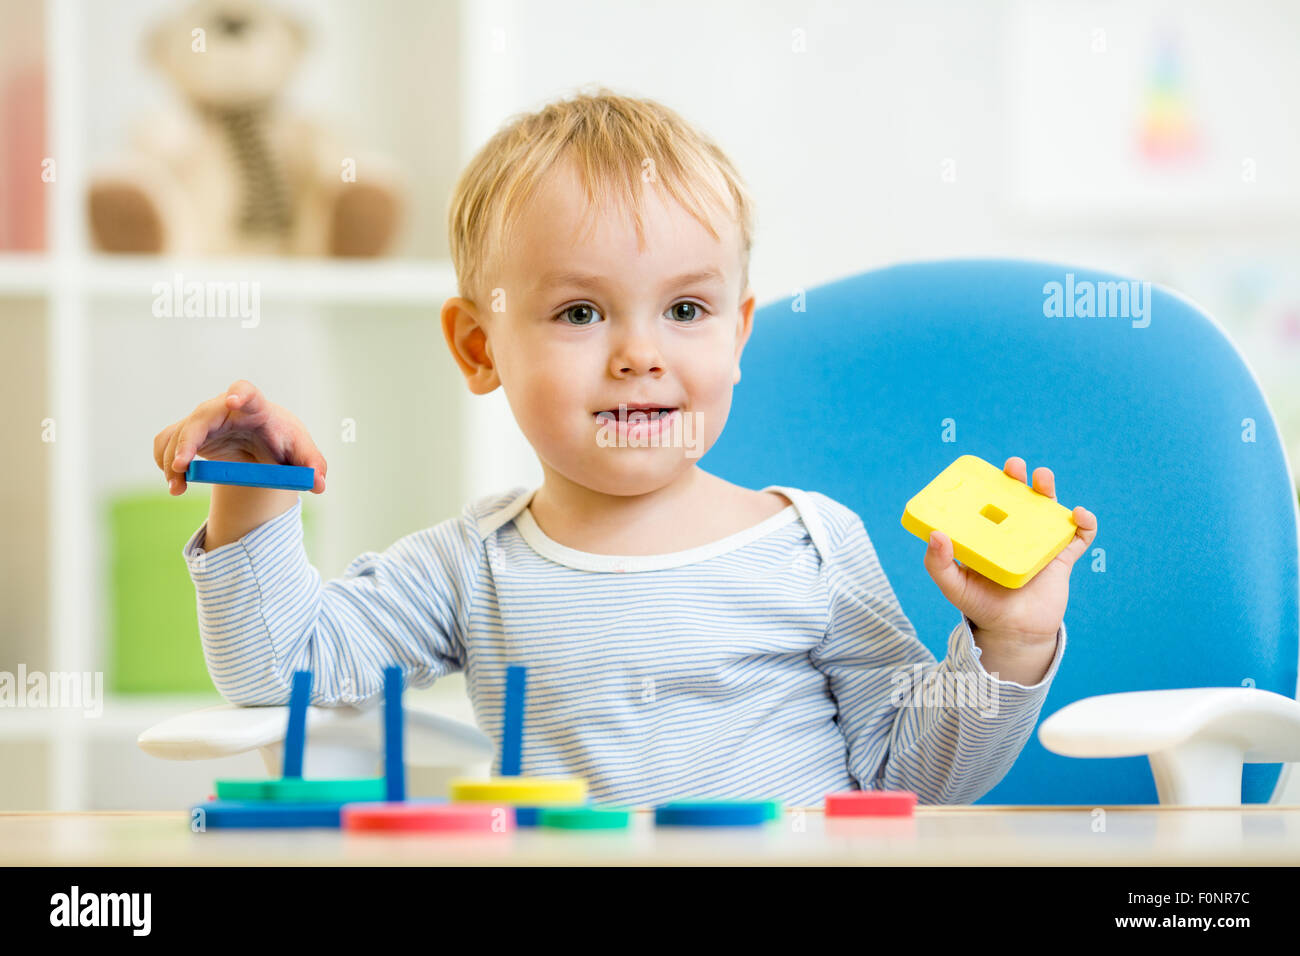 kid plays with education toys Stock Photo - Alamy